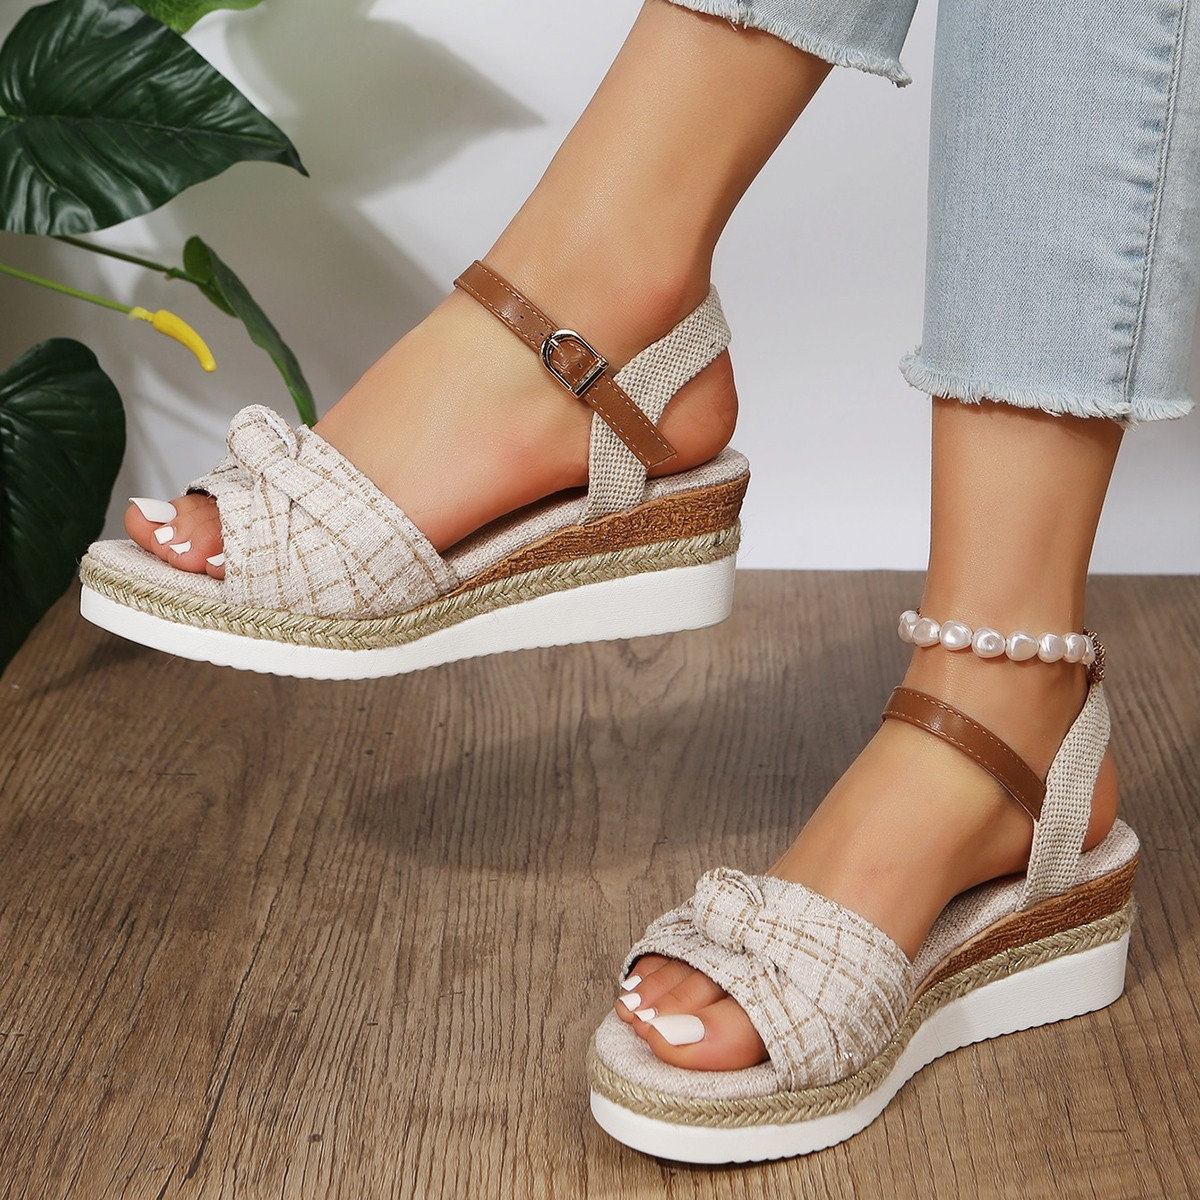 2023 Women's Butterfly-knot Wedge Sandals - Plus Size Casual Fashion Shoes